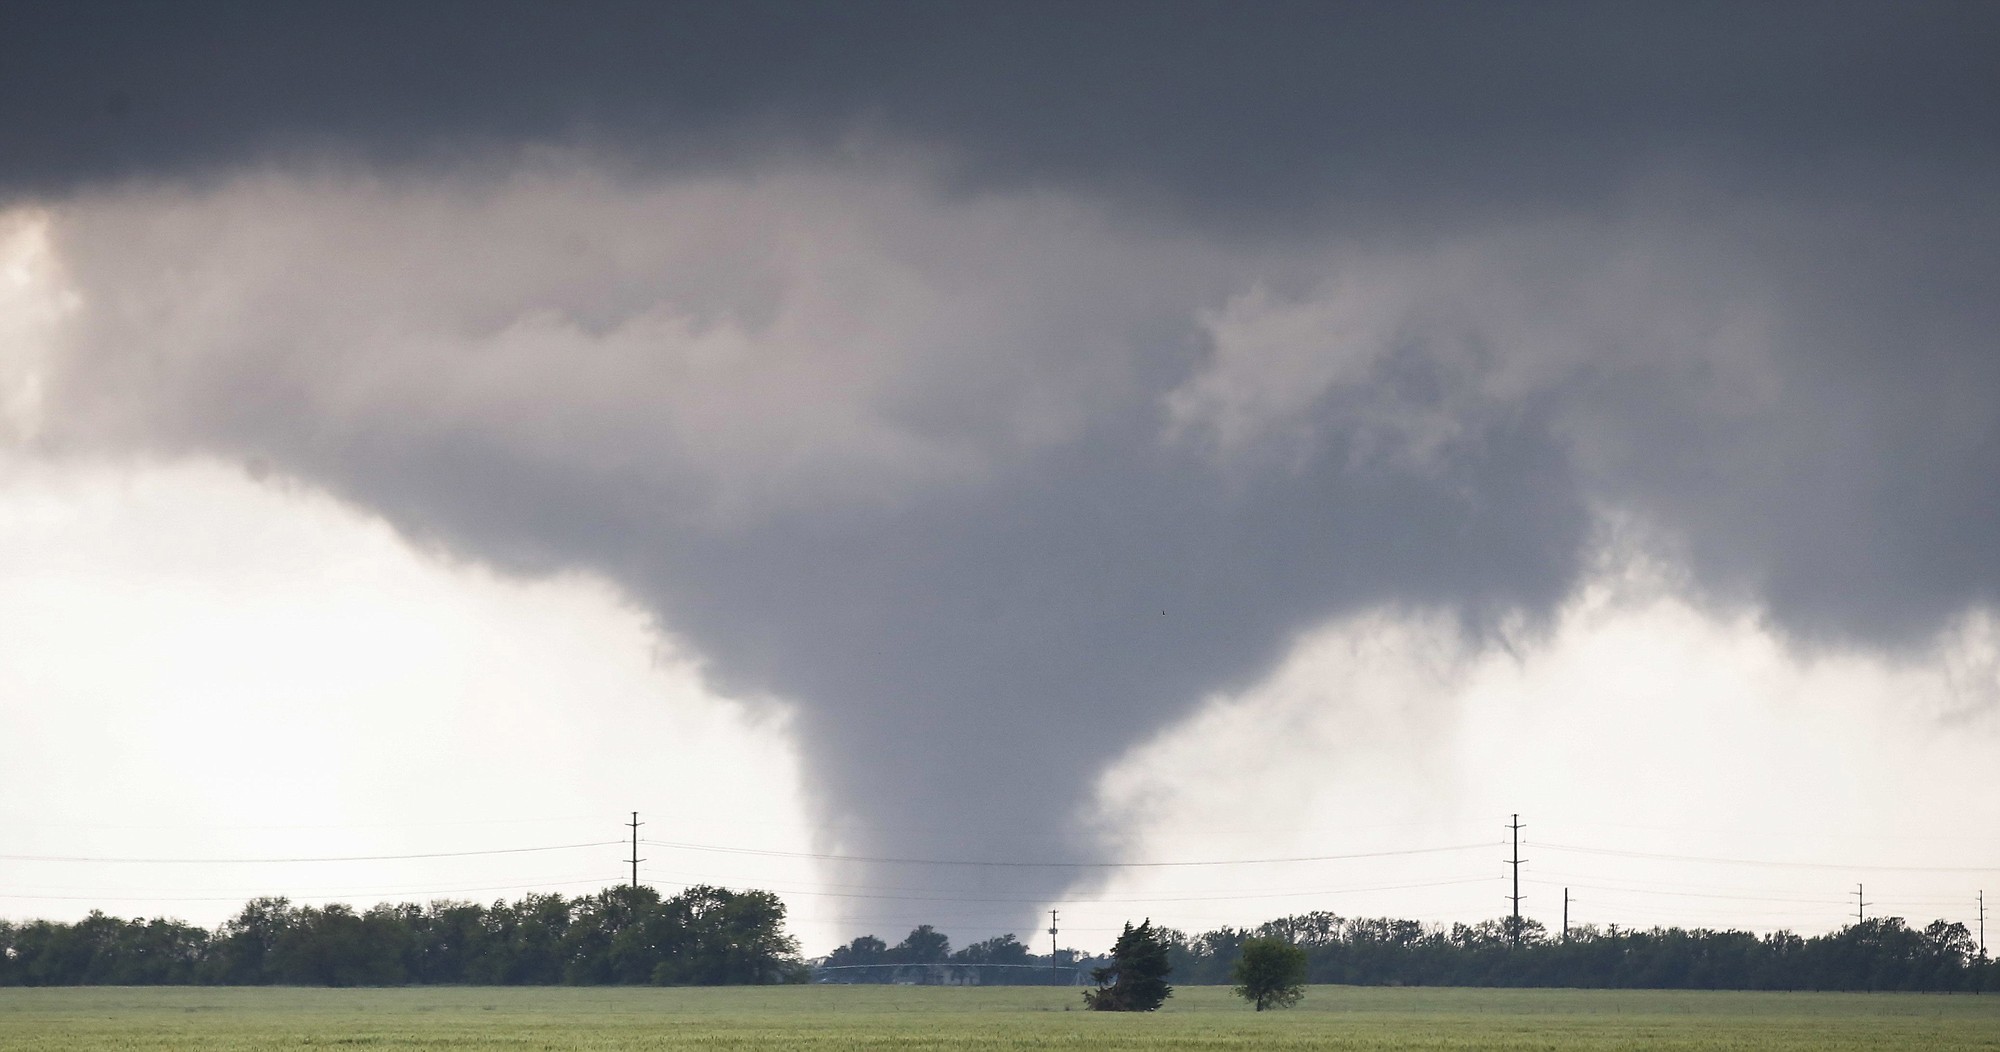 A large tornado passes just to the west of the city of Halstead, Kan., Wednesday, May 6, 2015. A swath of the Great Plains is under a tornado watch Wednesday, including parts of North Texas, Oklahoma, Kansas and Nebraska.